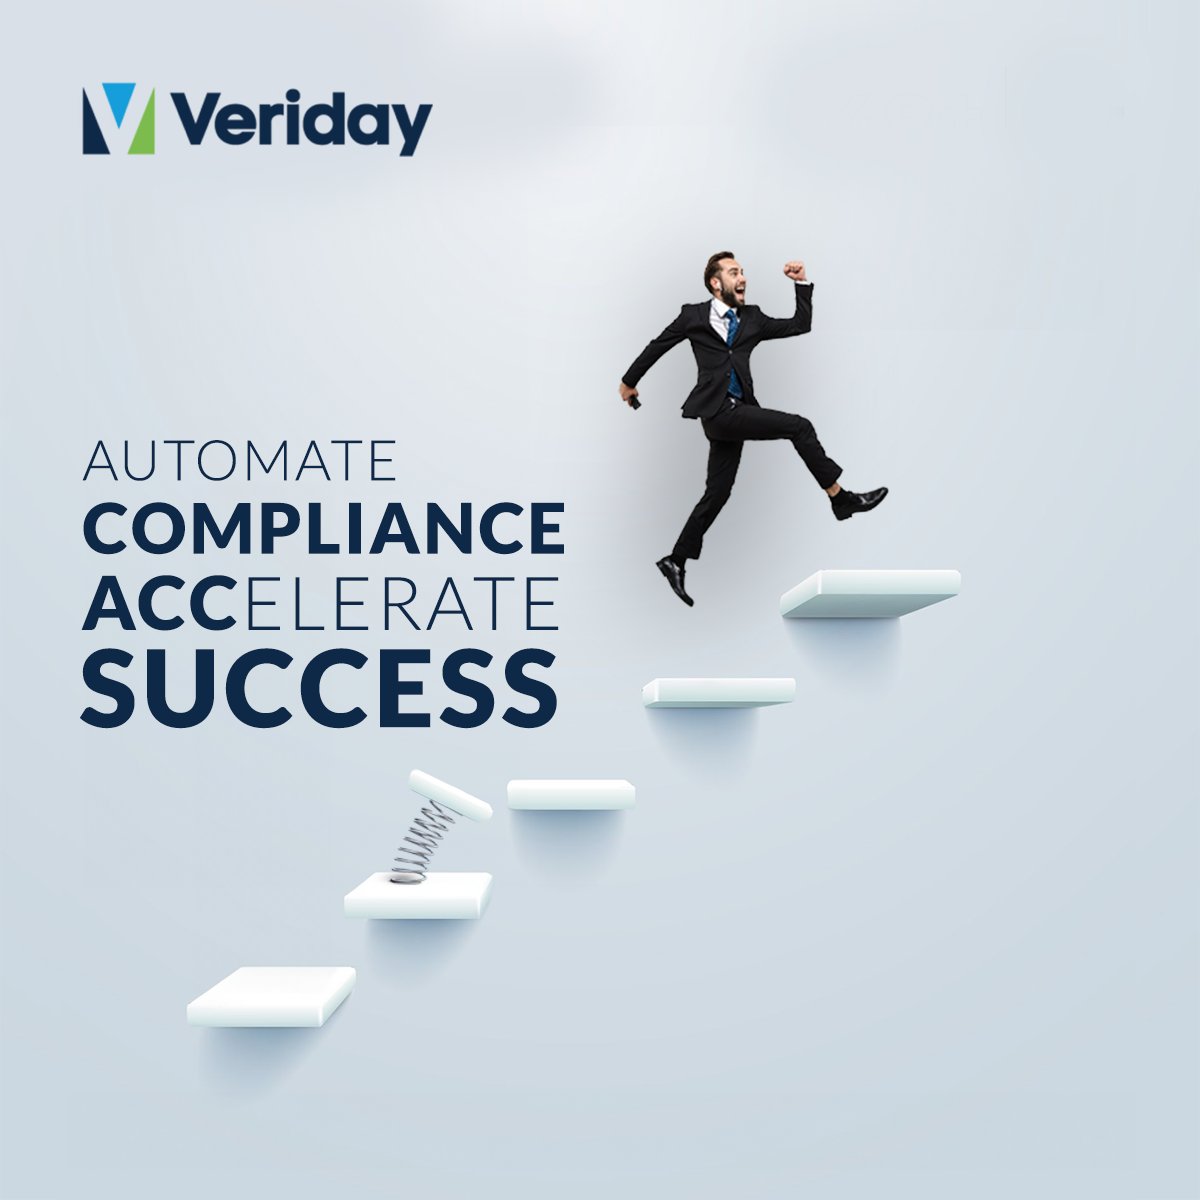 Intelligent #automation solutions are invaluable for insurers looking to navigate the complex regulatory landscape and achieve #compliance. Read this blog to find out how automation solutions can minimize compliance risks: zurl.co/wH58 #Risk #Insurance #BusinessProcess